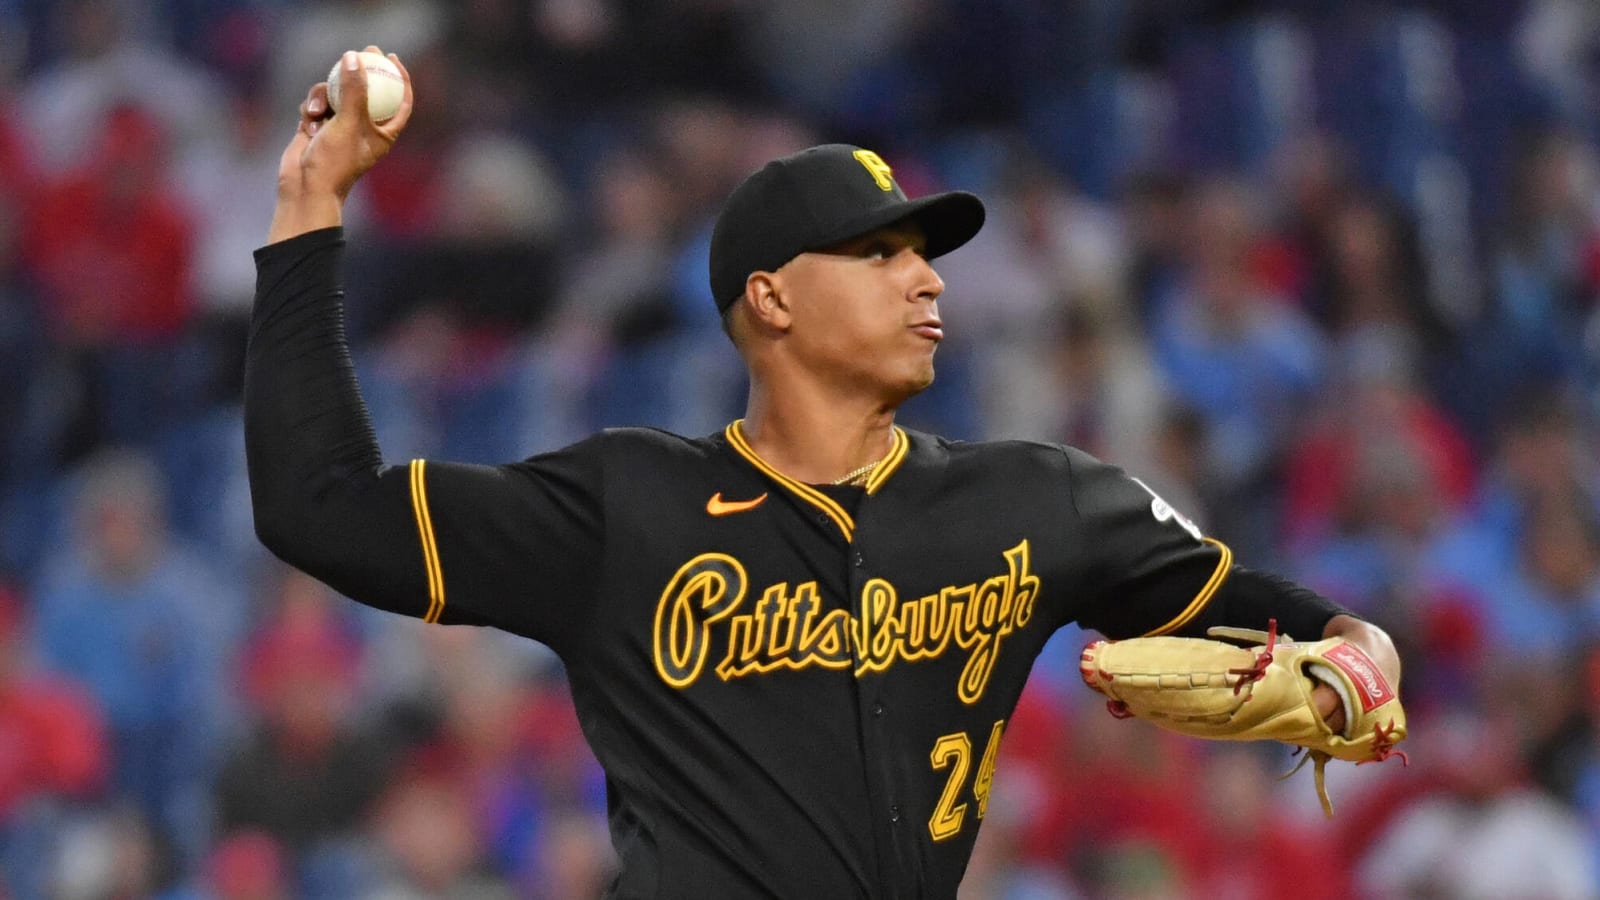 Pirates rotation gets murkier as RHP is evaluated for serious elbow injury